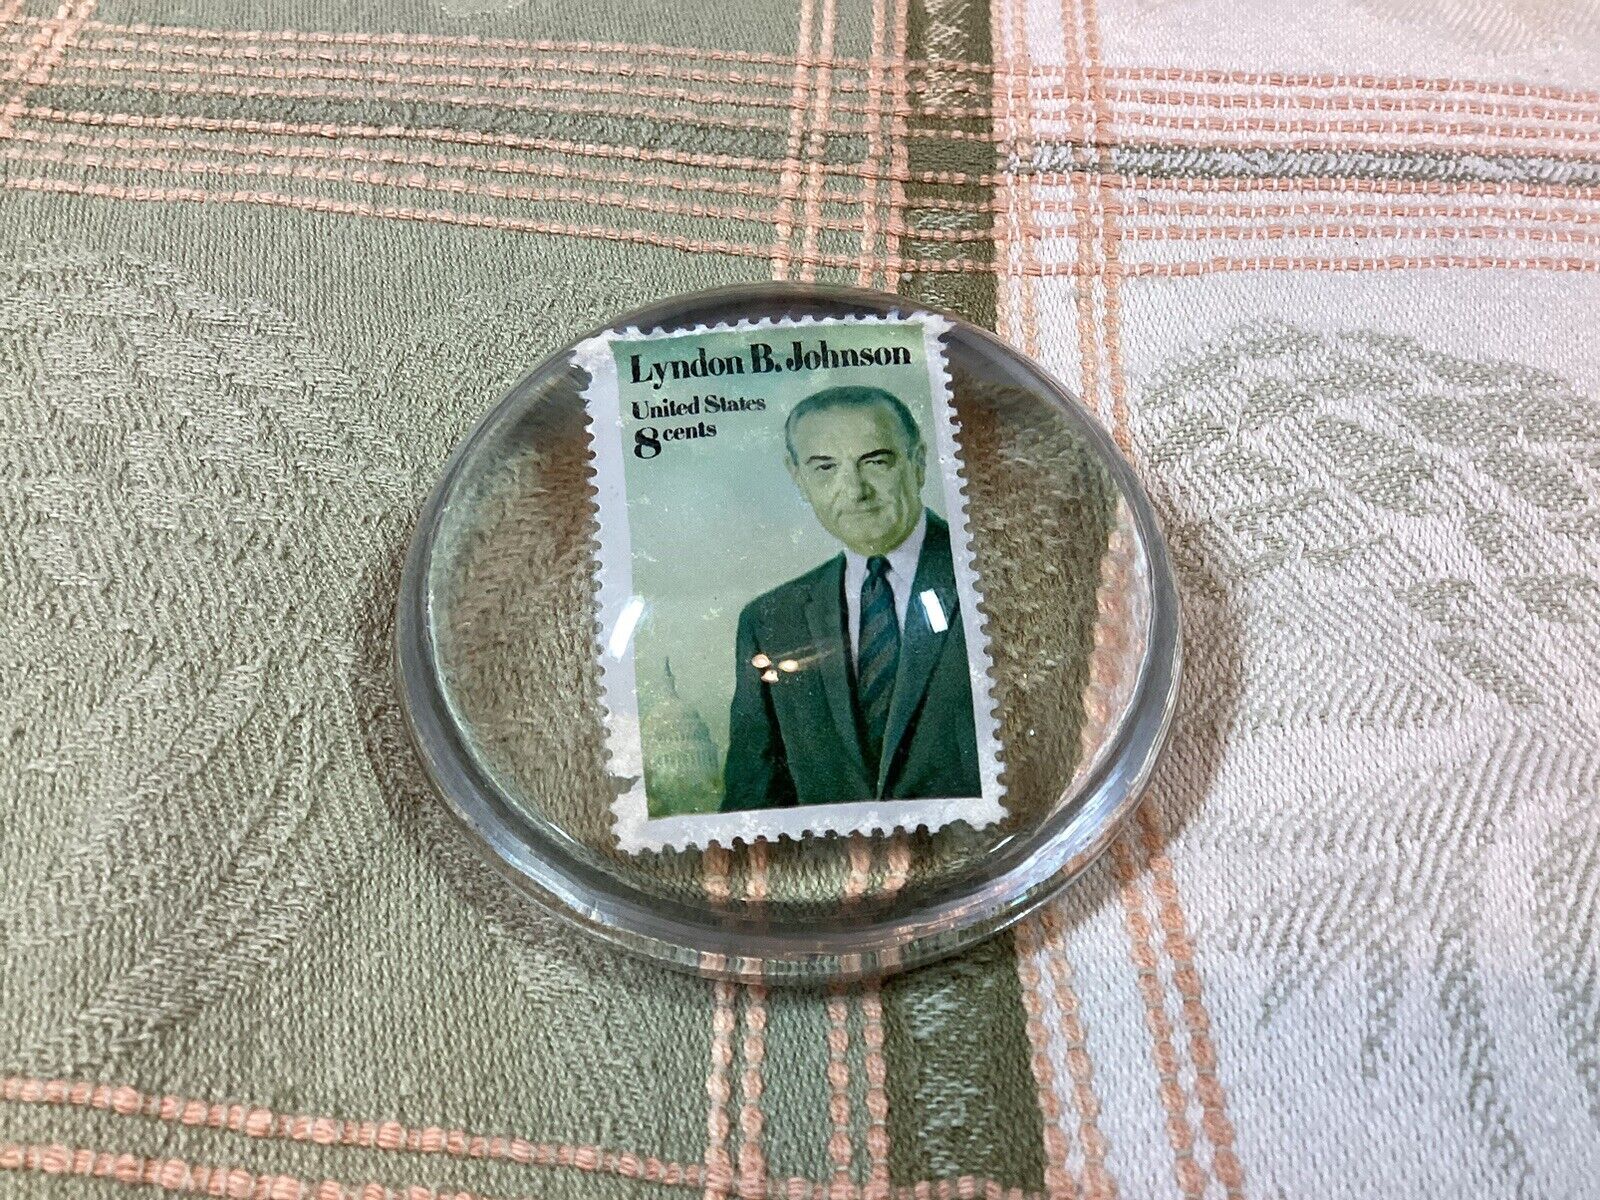 Lyndon B Johnson Glass Paperweight with 8 Cent Stamp